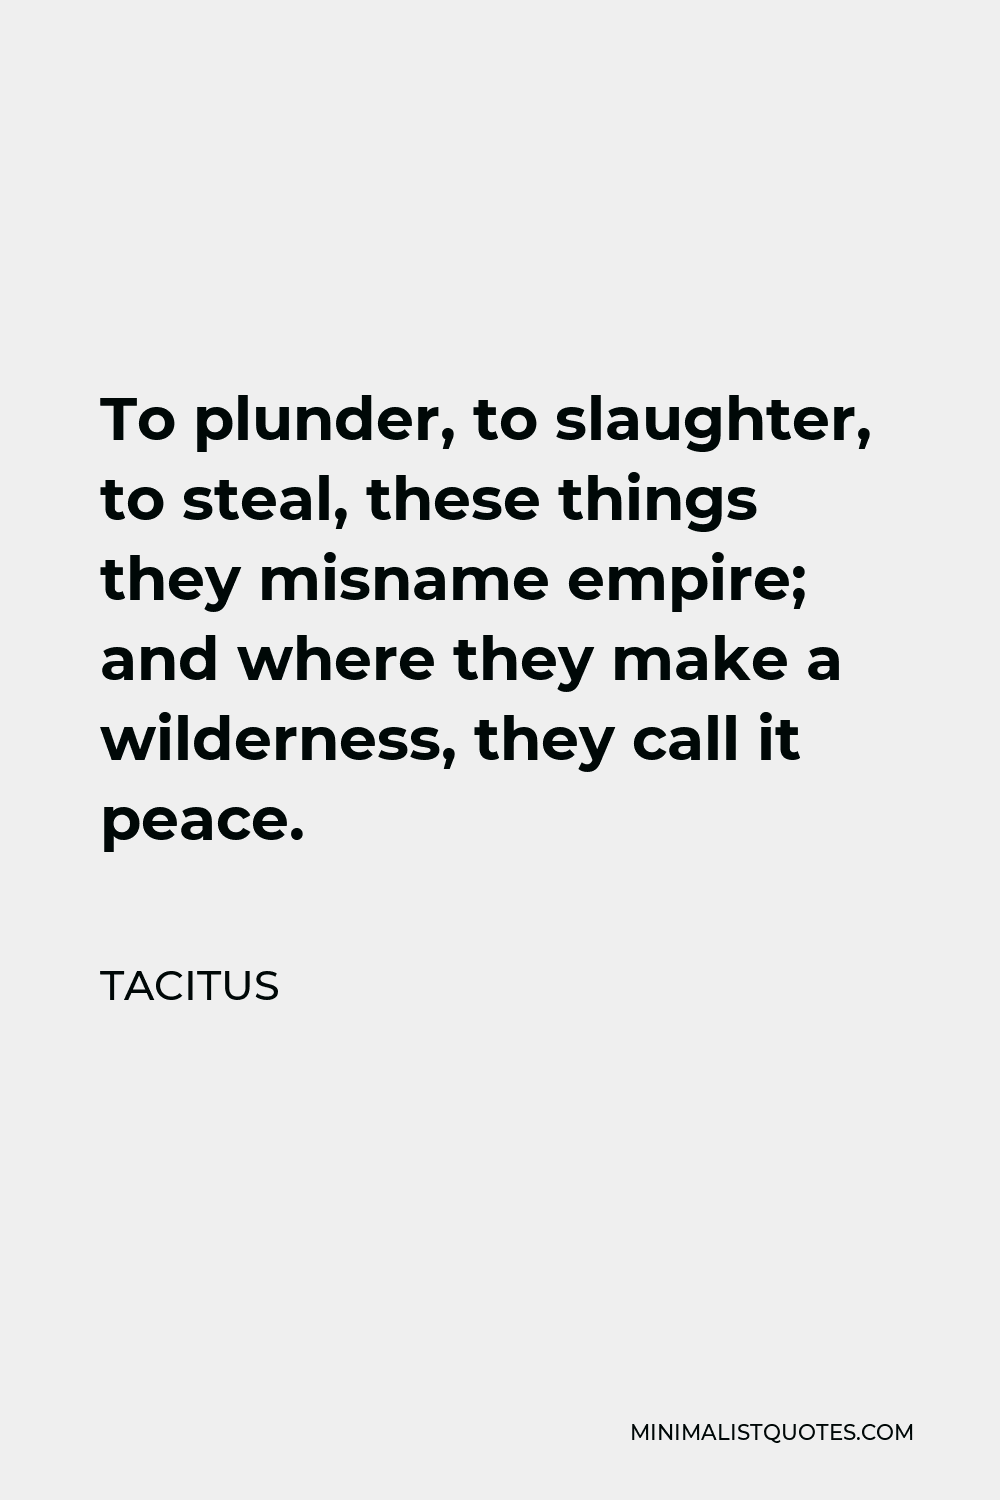 Tacitus Quote - To plunder, to slaughter, to steal, these things they misname empire; and where they make a wilderness, they call it peace.